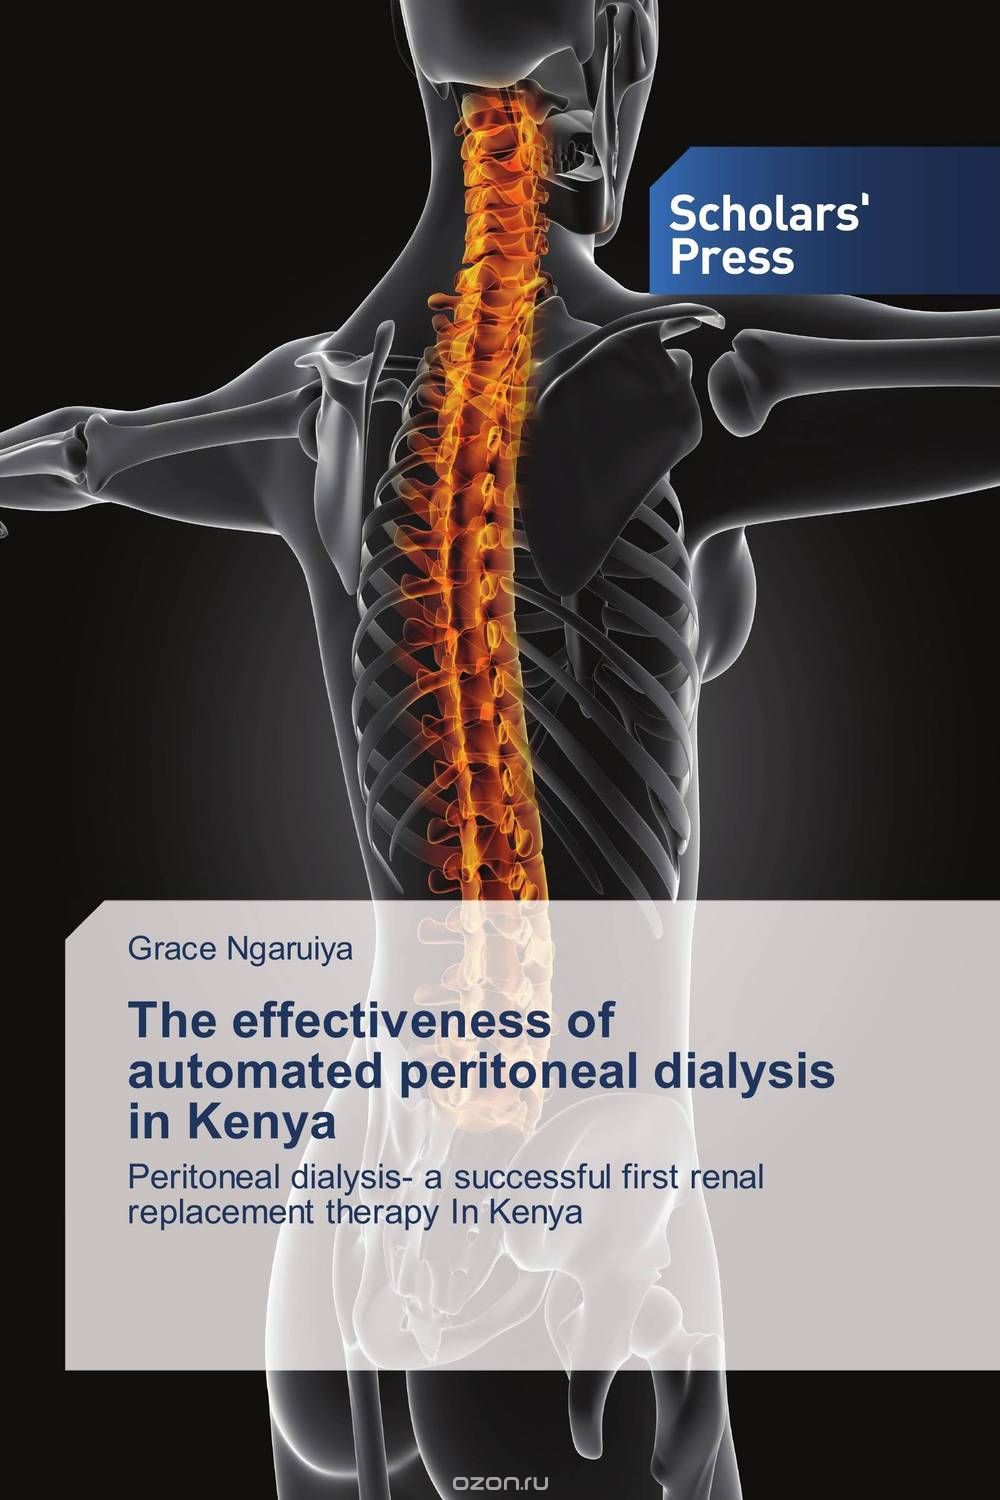 The effectiveness of automated peritoneal dialysis in Kenya